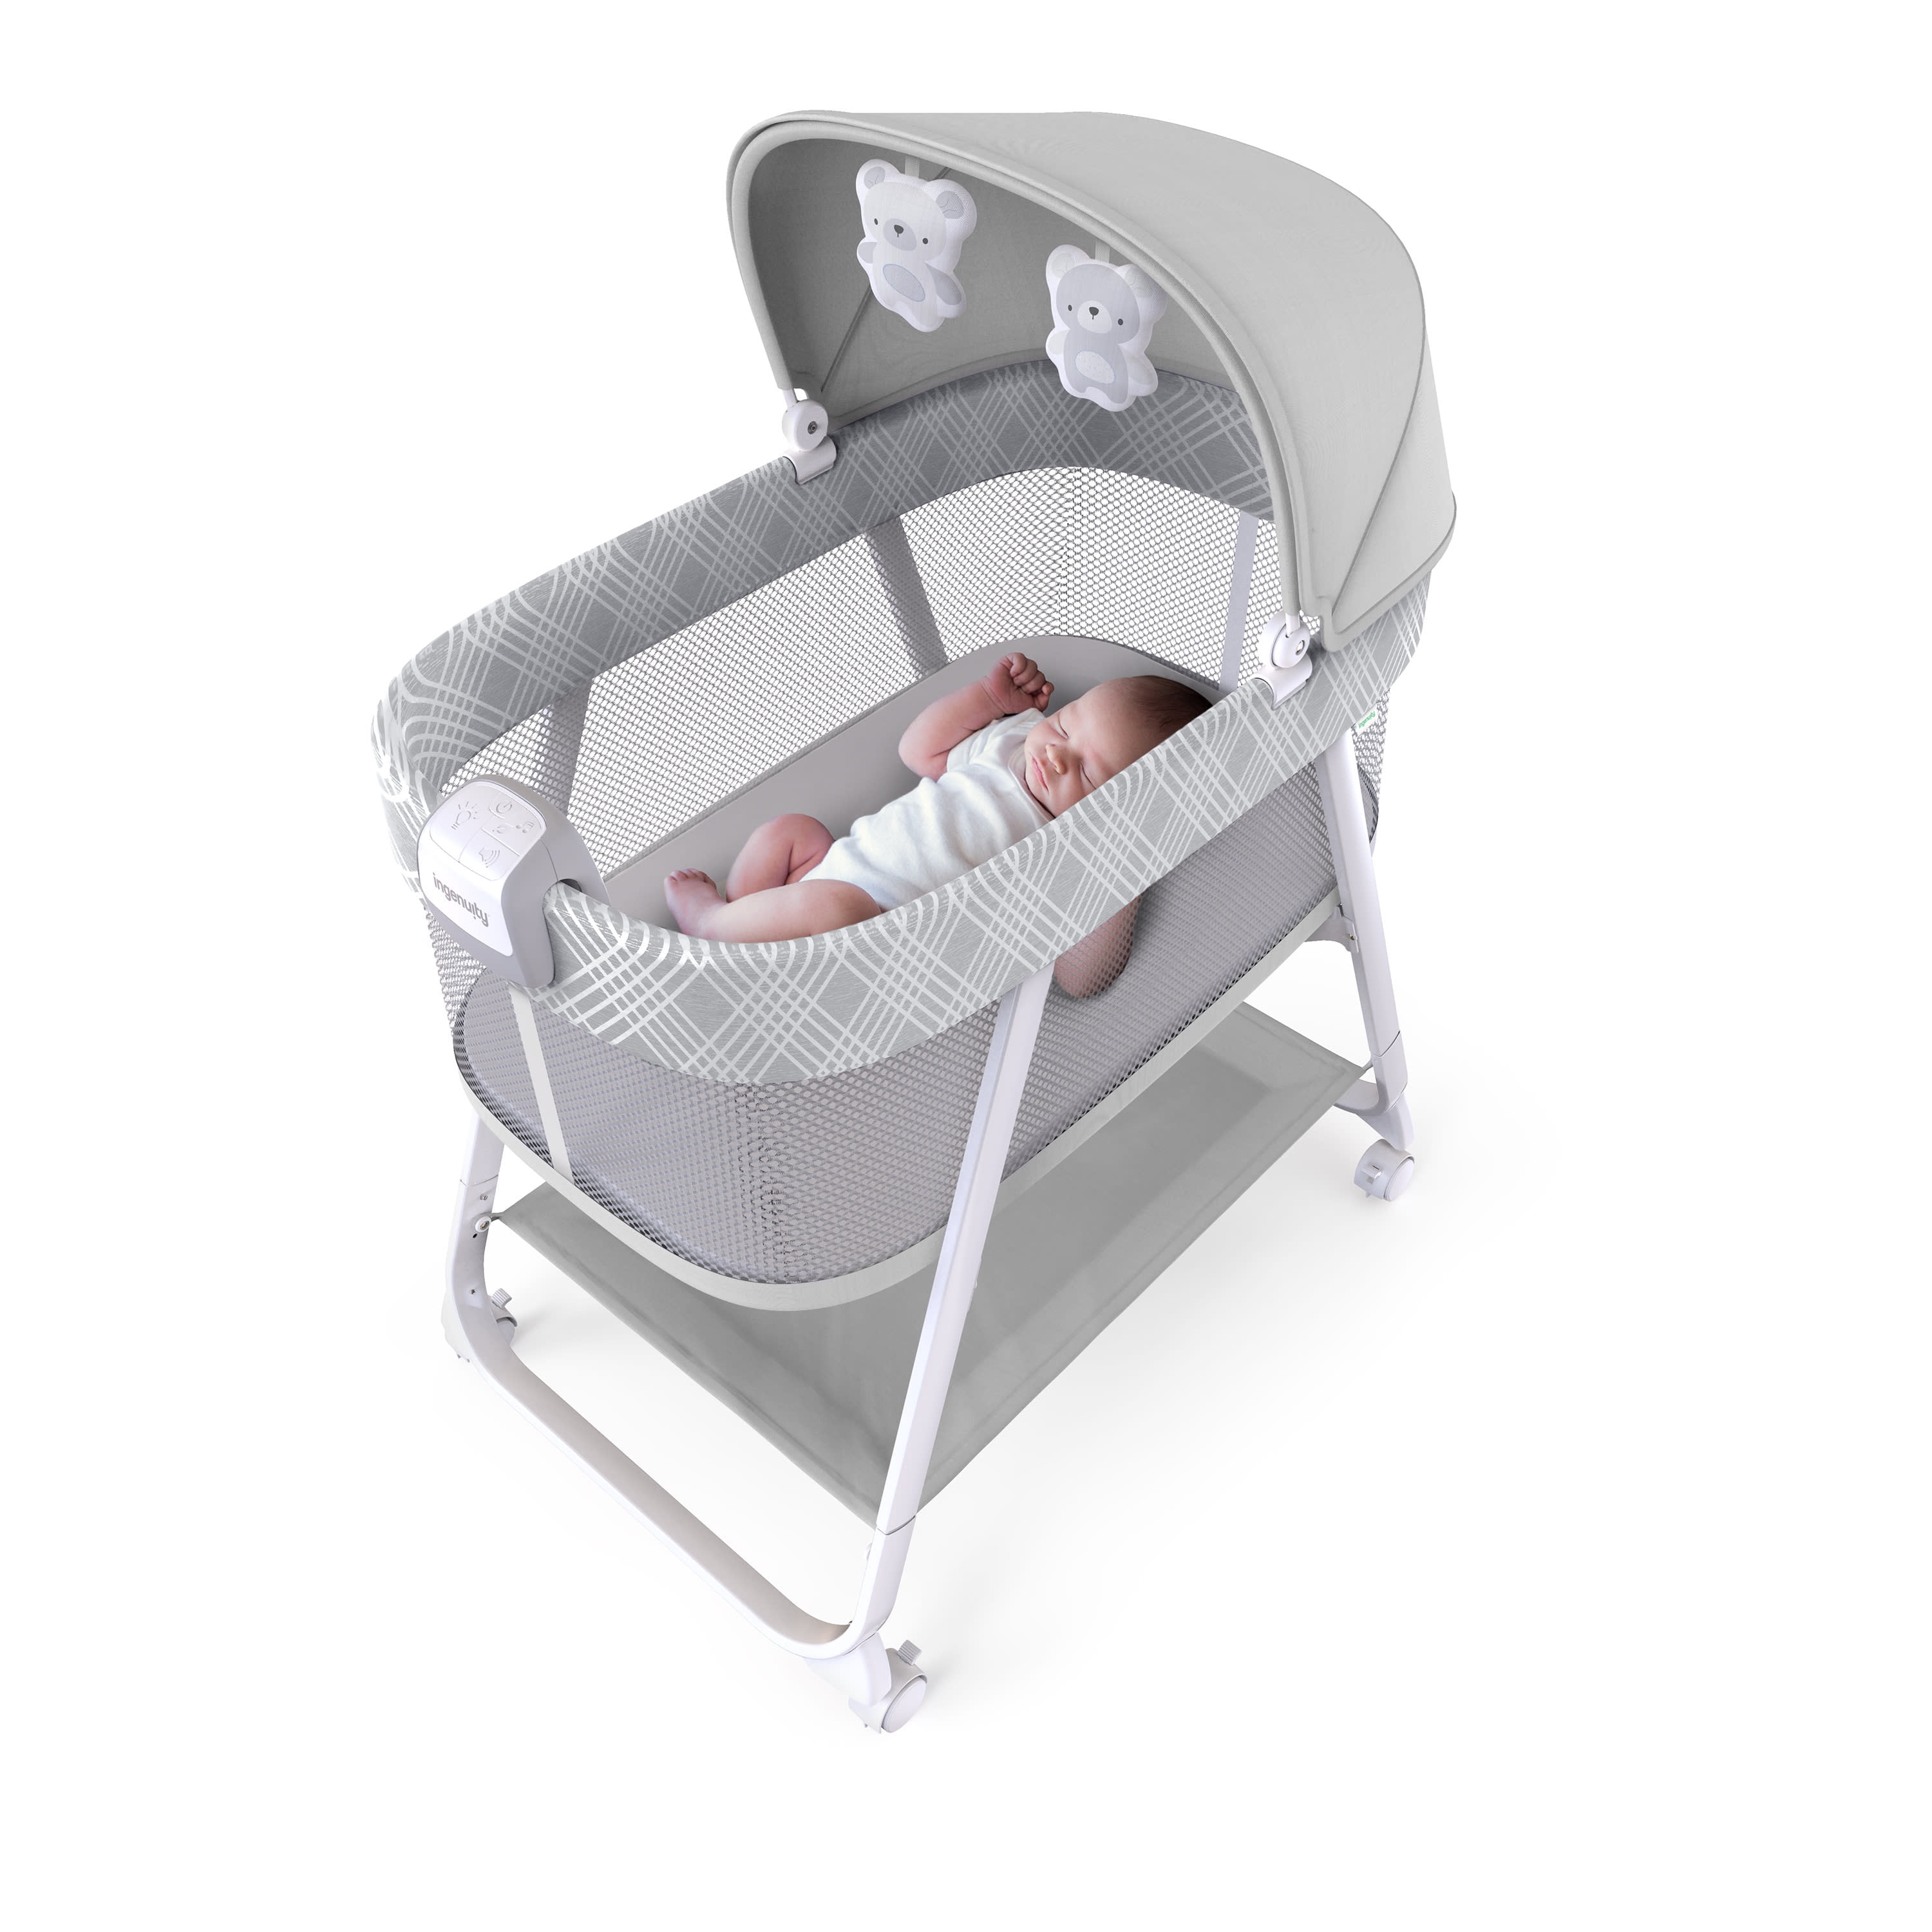 Ingenuity Lullanight Soothing Vibrations Bassinet for Baby with Locking Wheels & Night Light Gem Newborn to 5 Months 